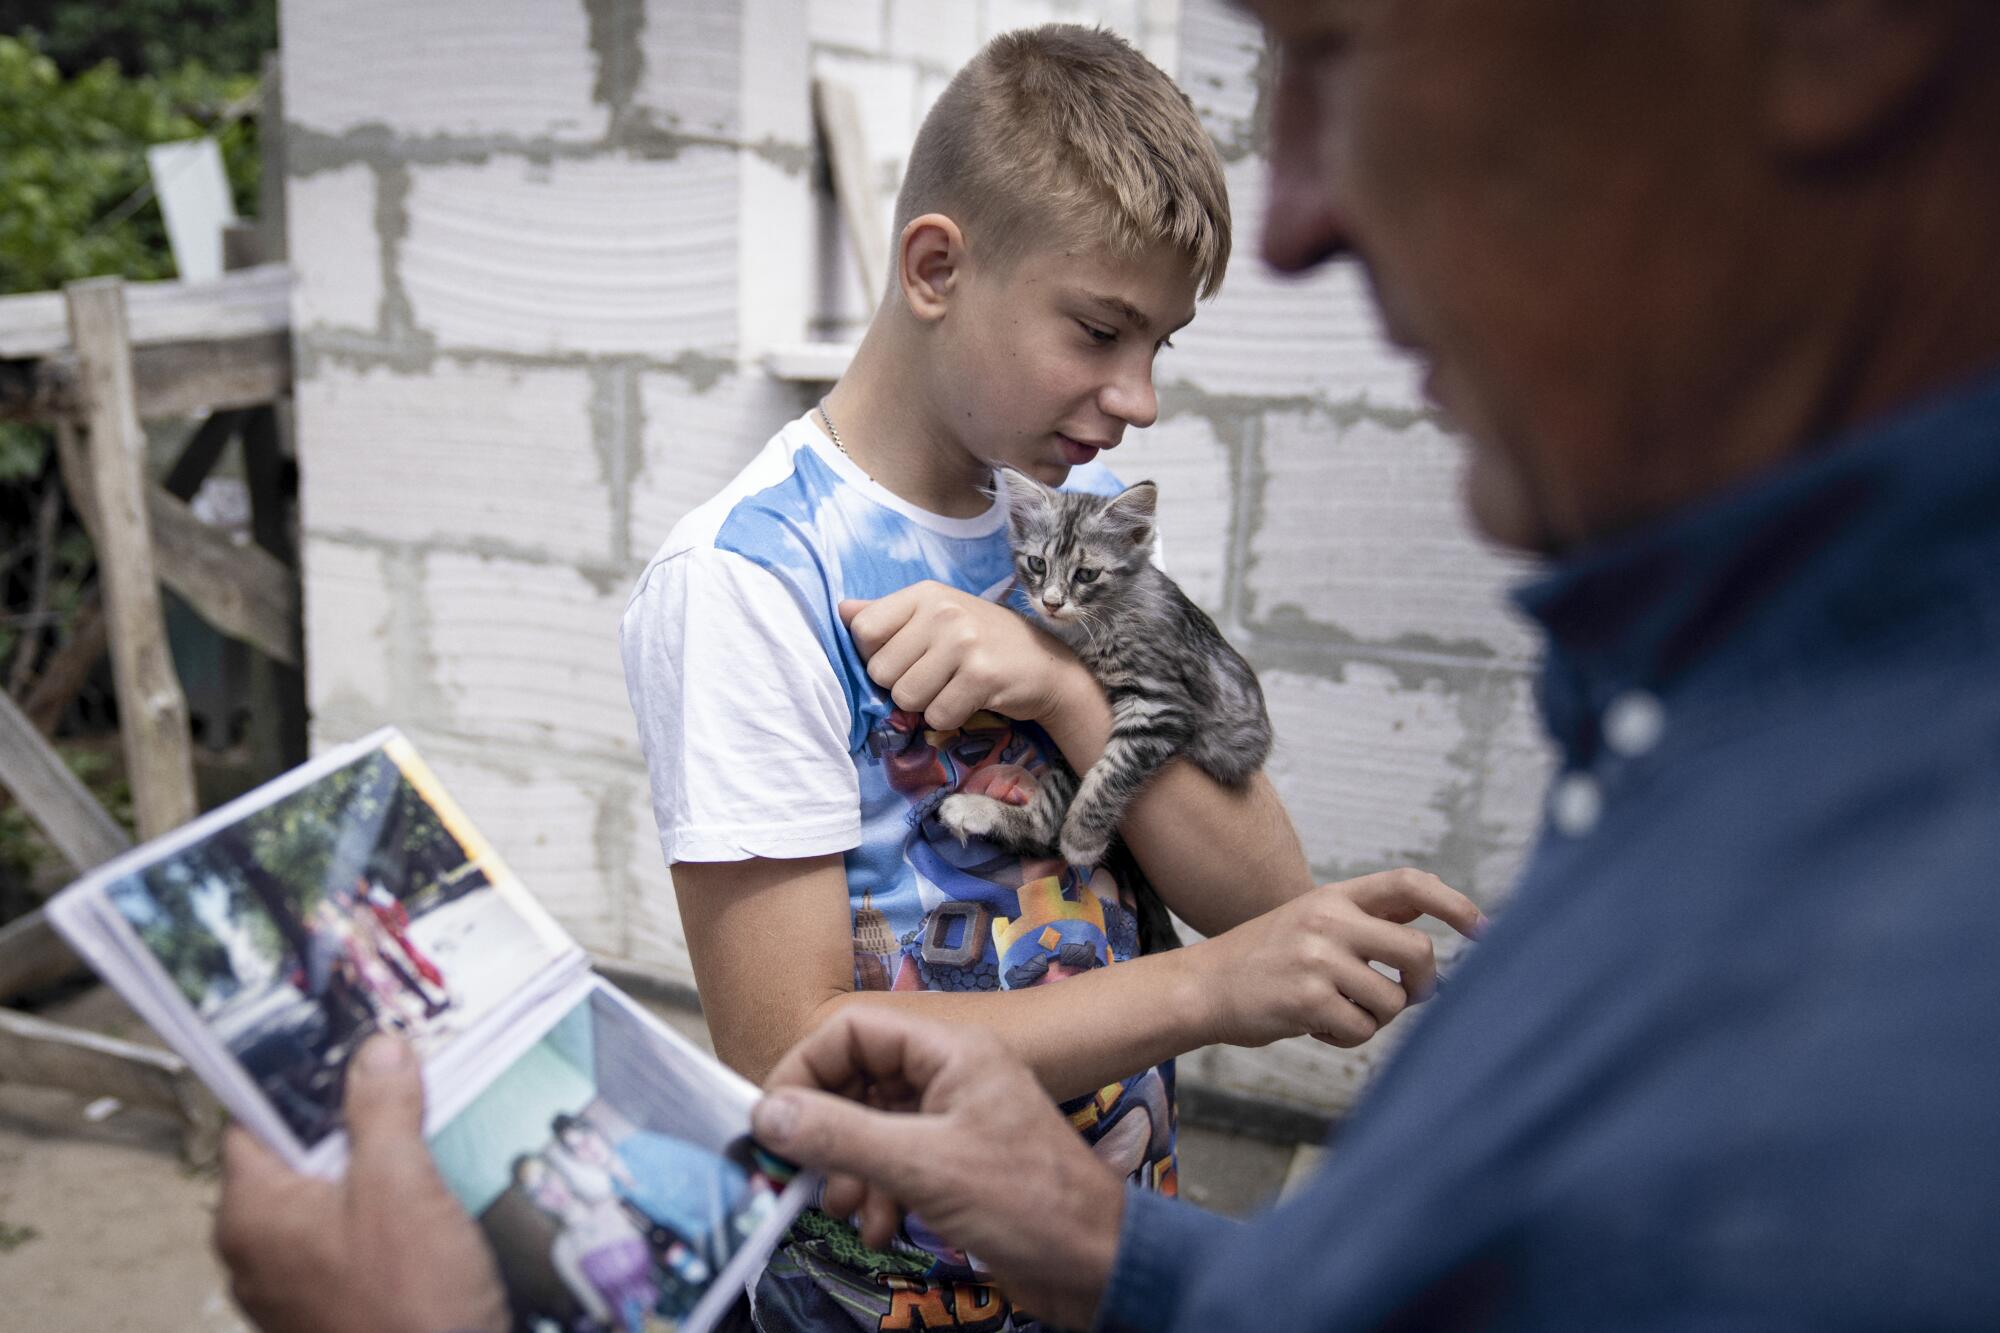 A boy holds a kitten as a man looks at a photo book.